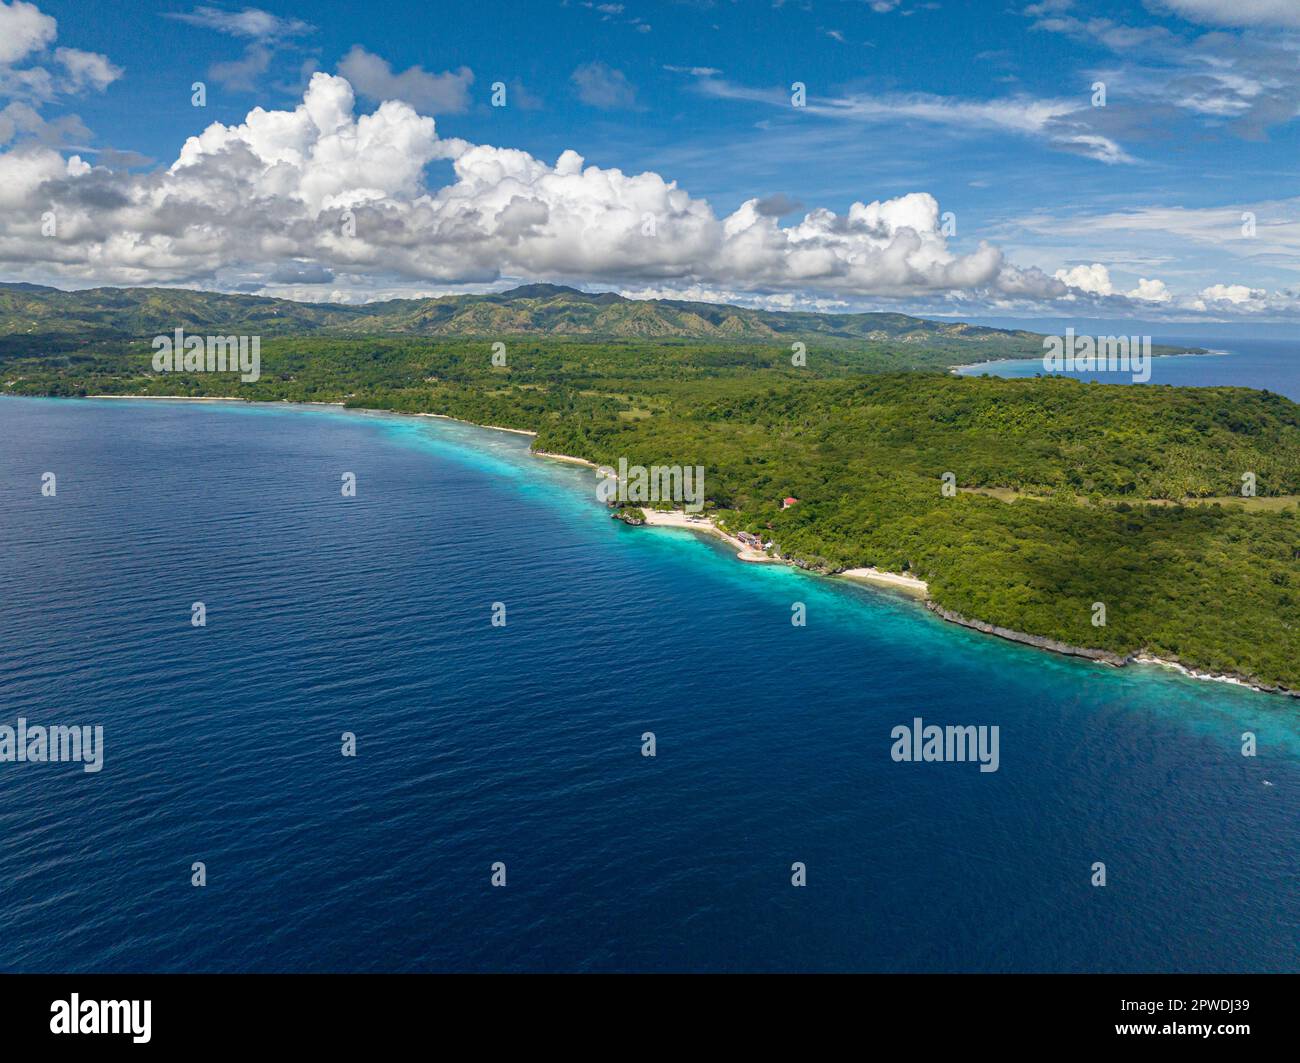 Birds eye view shot of Paradise looks of Siquijor Island under the clear blue skies. Siquijor, Philippines. Stock Photo